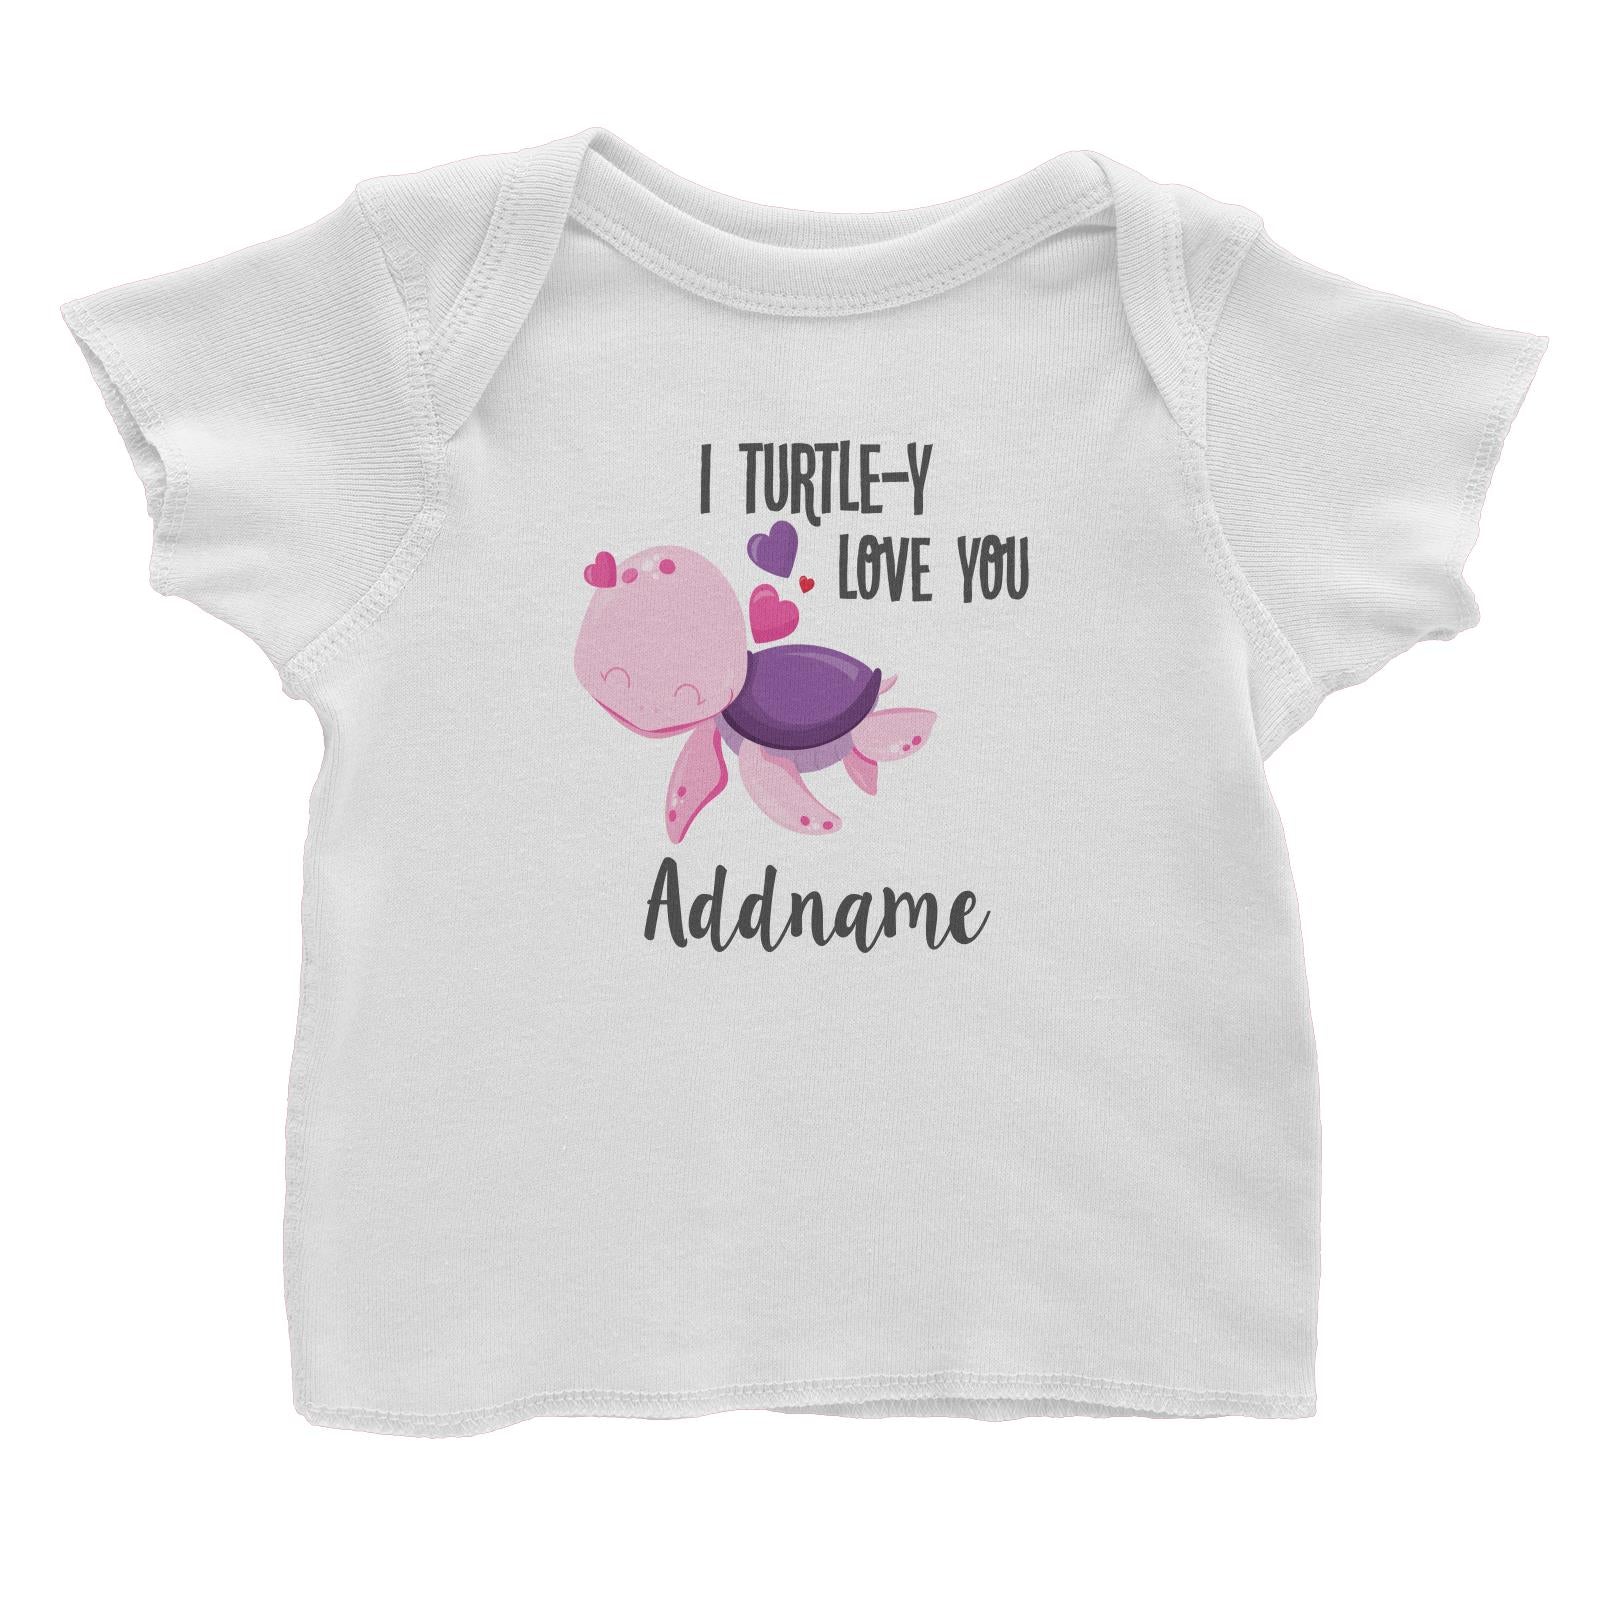 Cute Sea Animals I Turtle-Y Love You Addname Baby T-Shirt